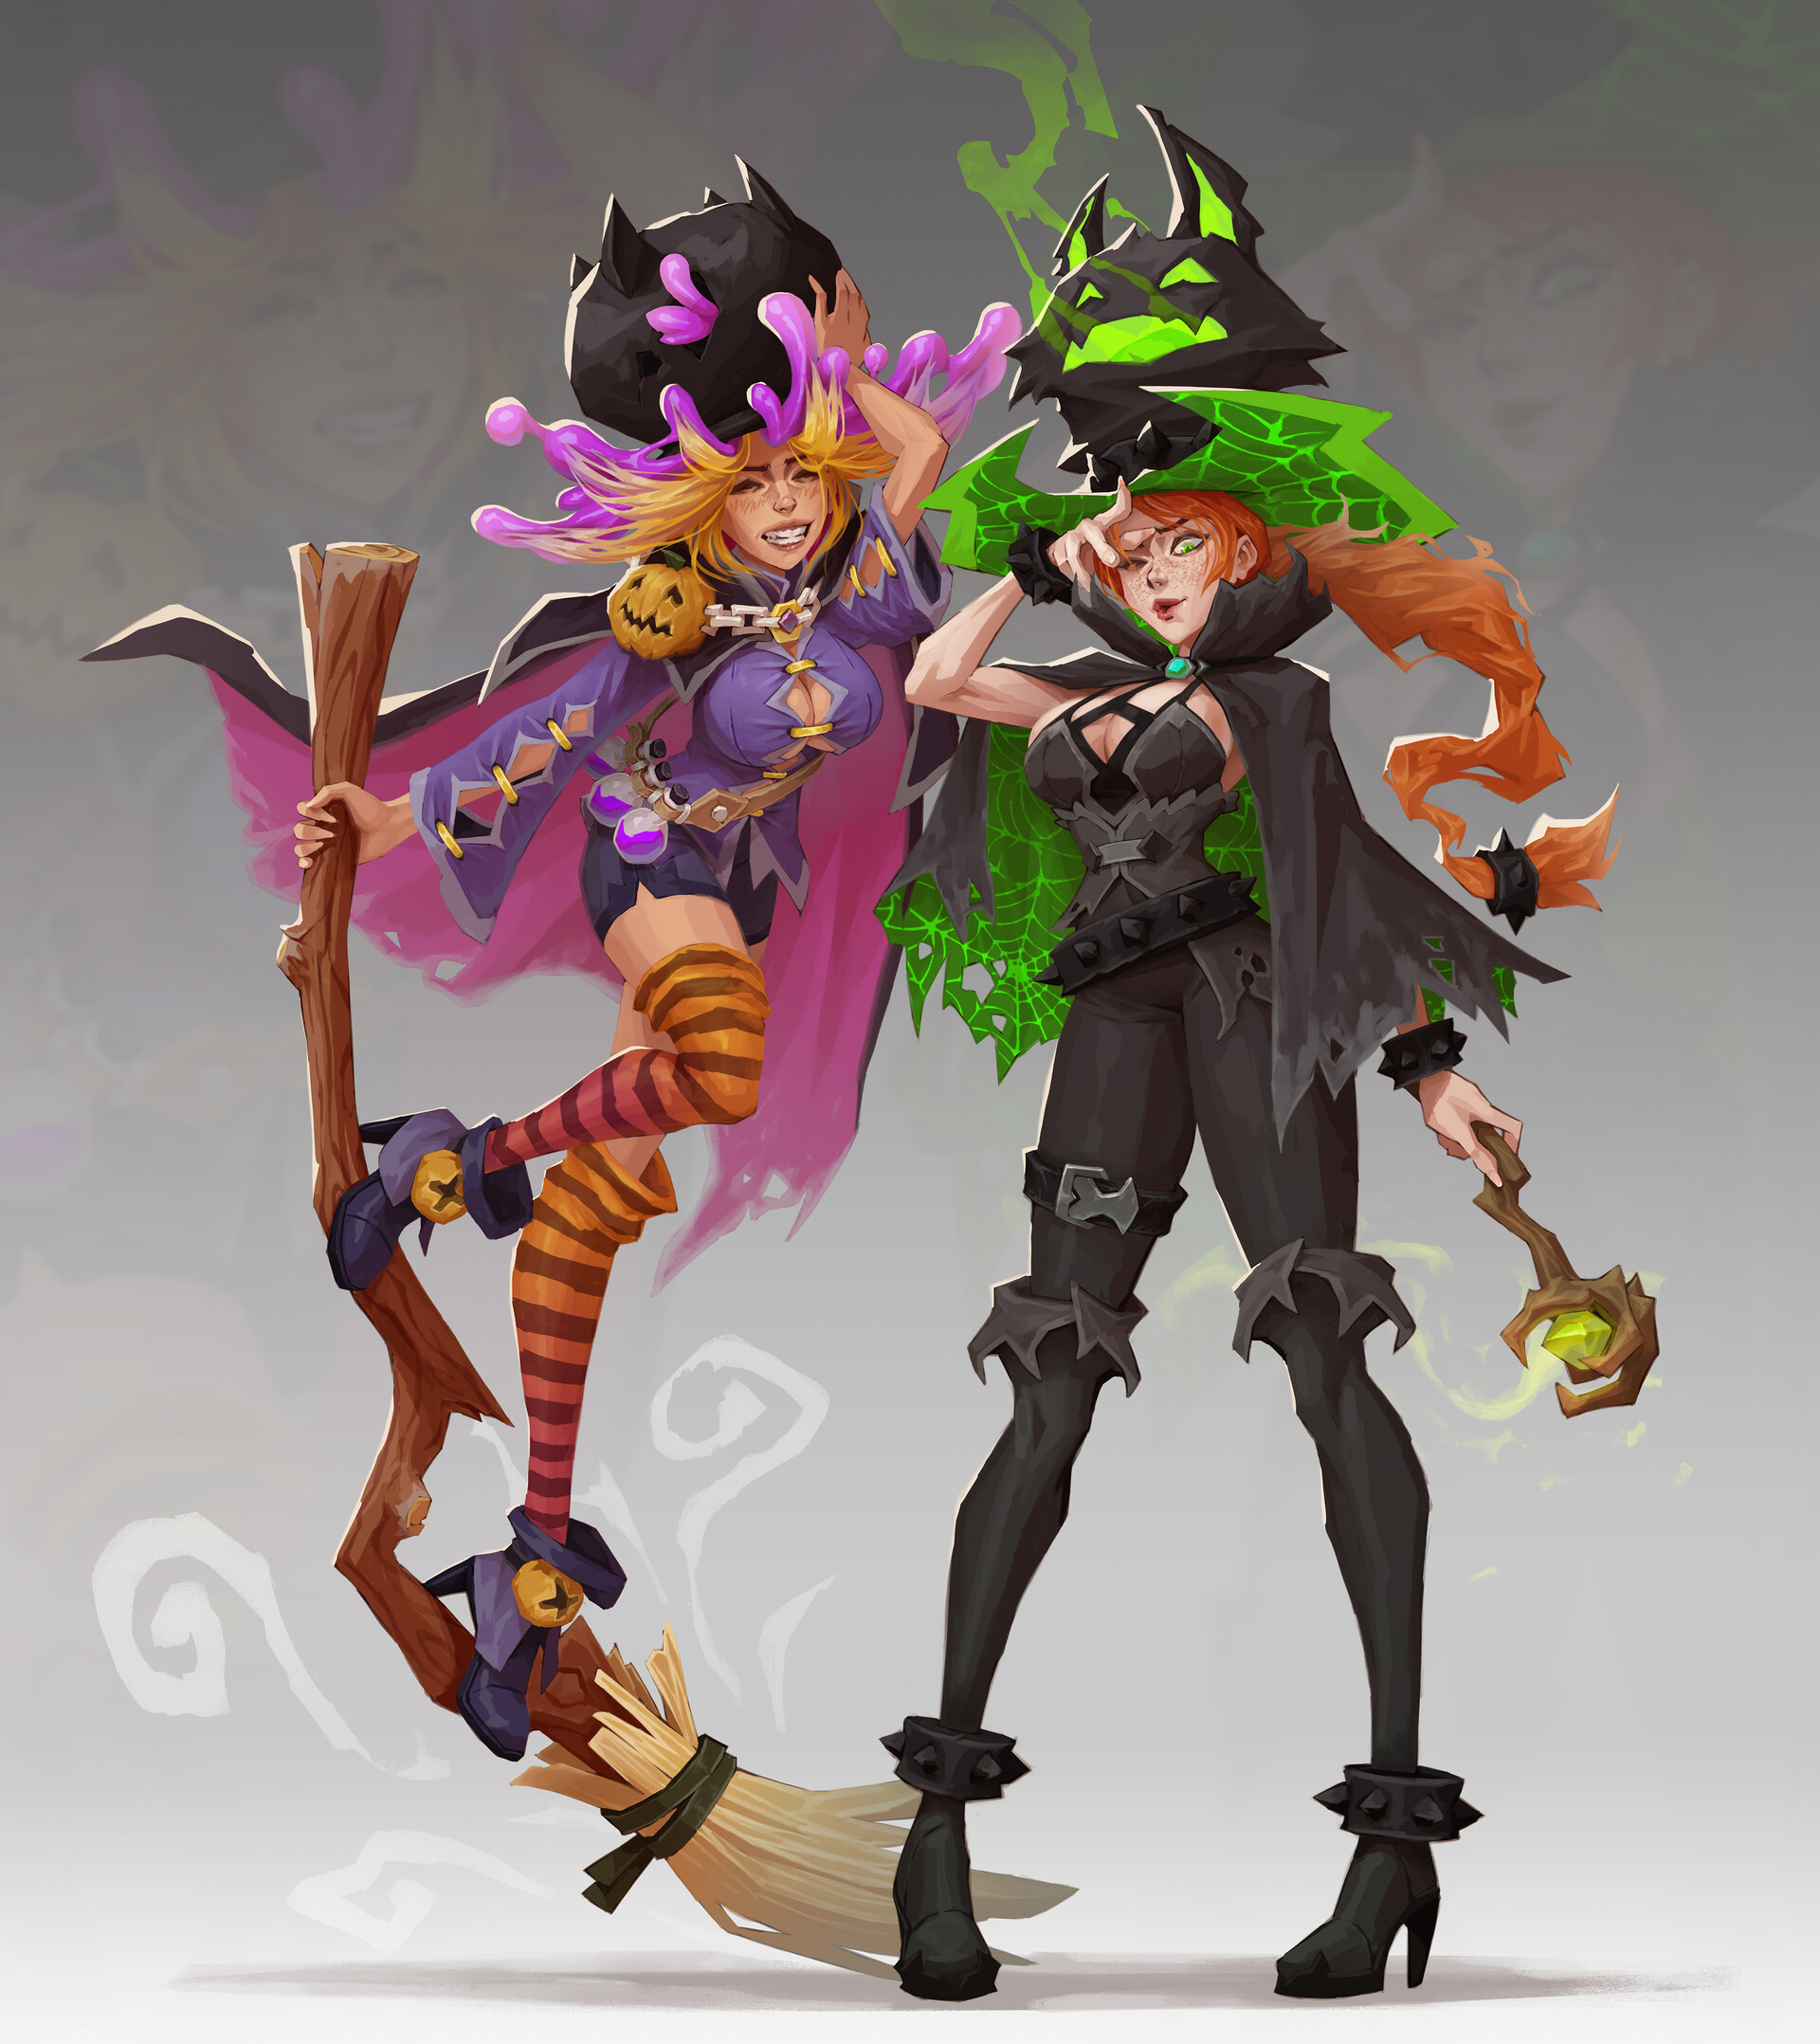 ArtStation - Anime witches